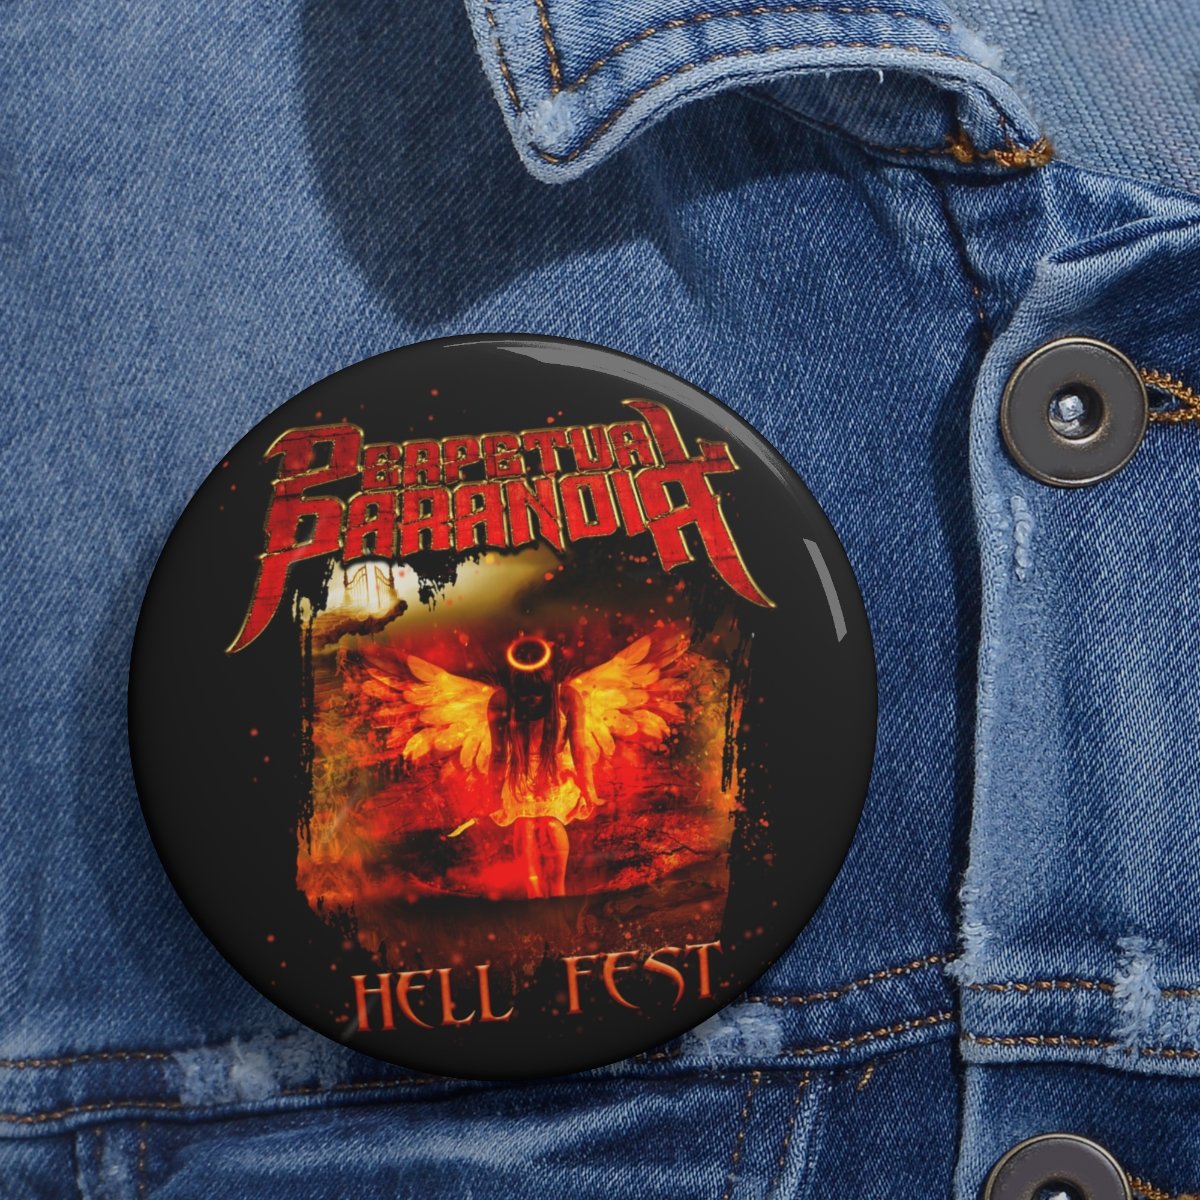 Perpetual Paranoia – Hell Fest Pin Buttons